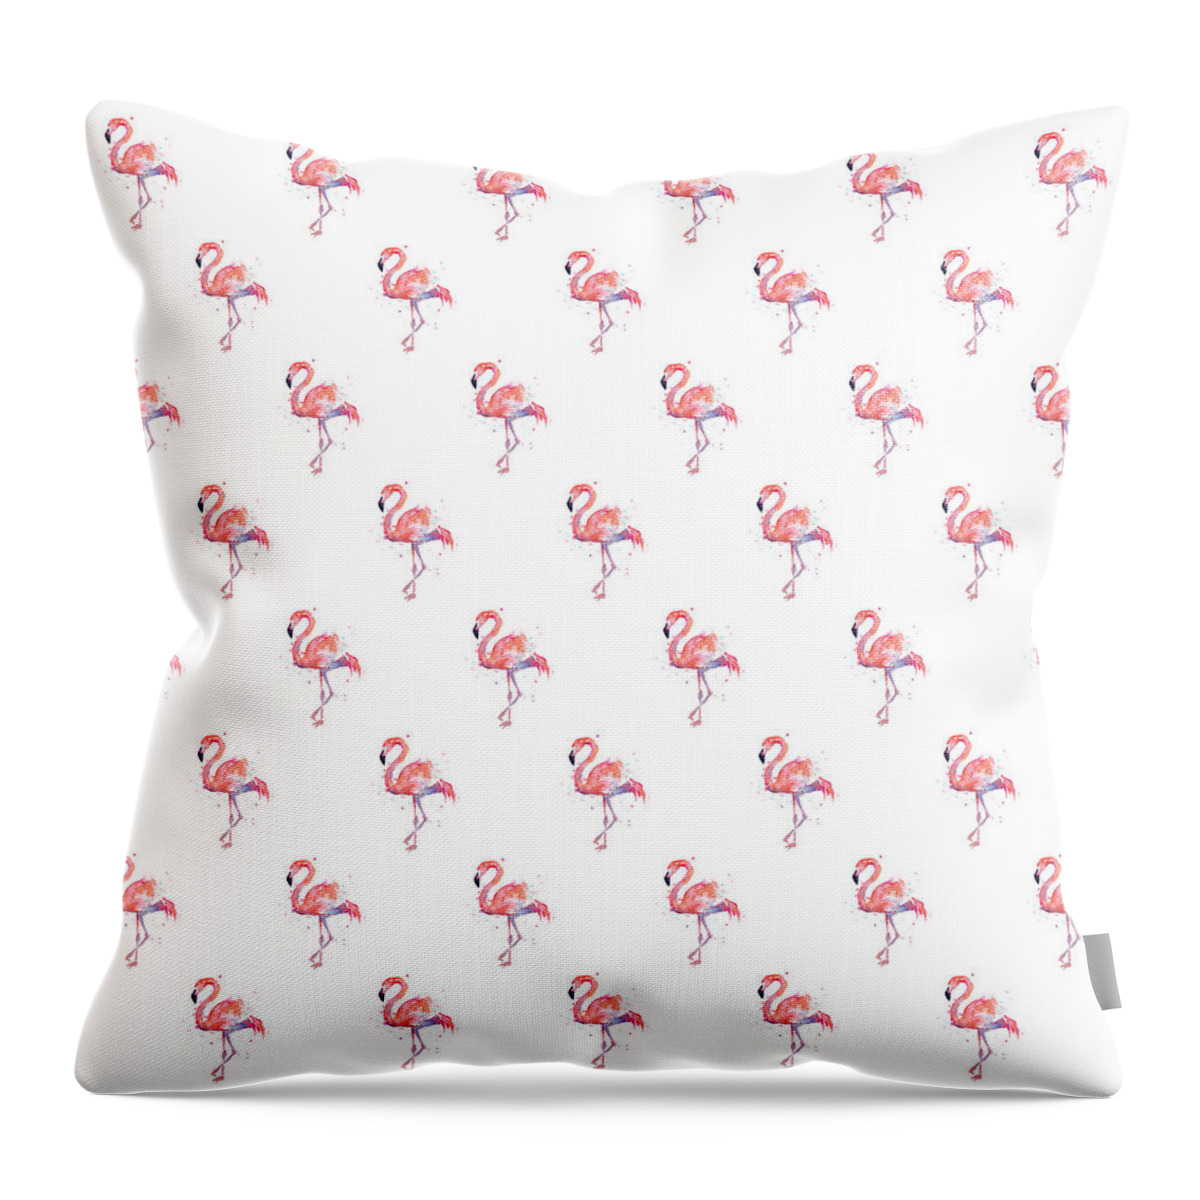 Pink Throw Pillow featuring the painting Pink Flamingo Watercolor Pattern by Olga Shvartsur